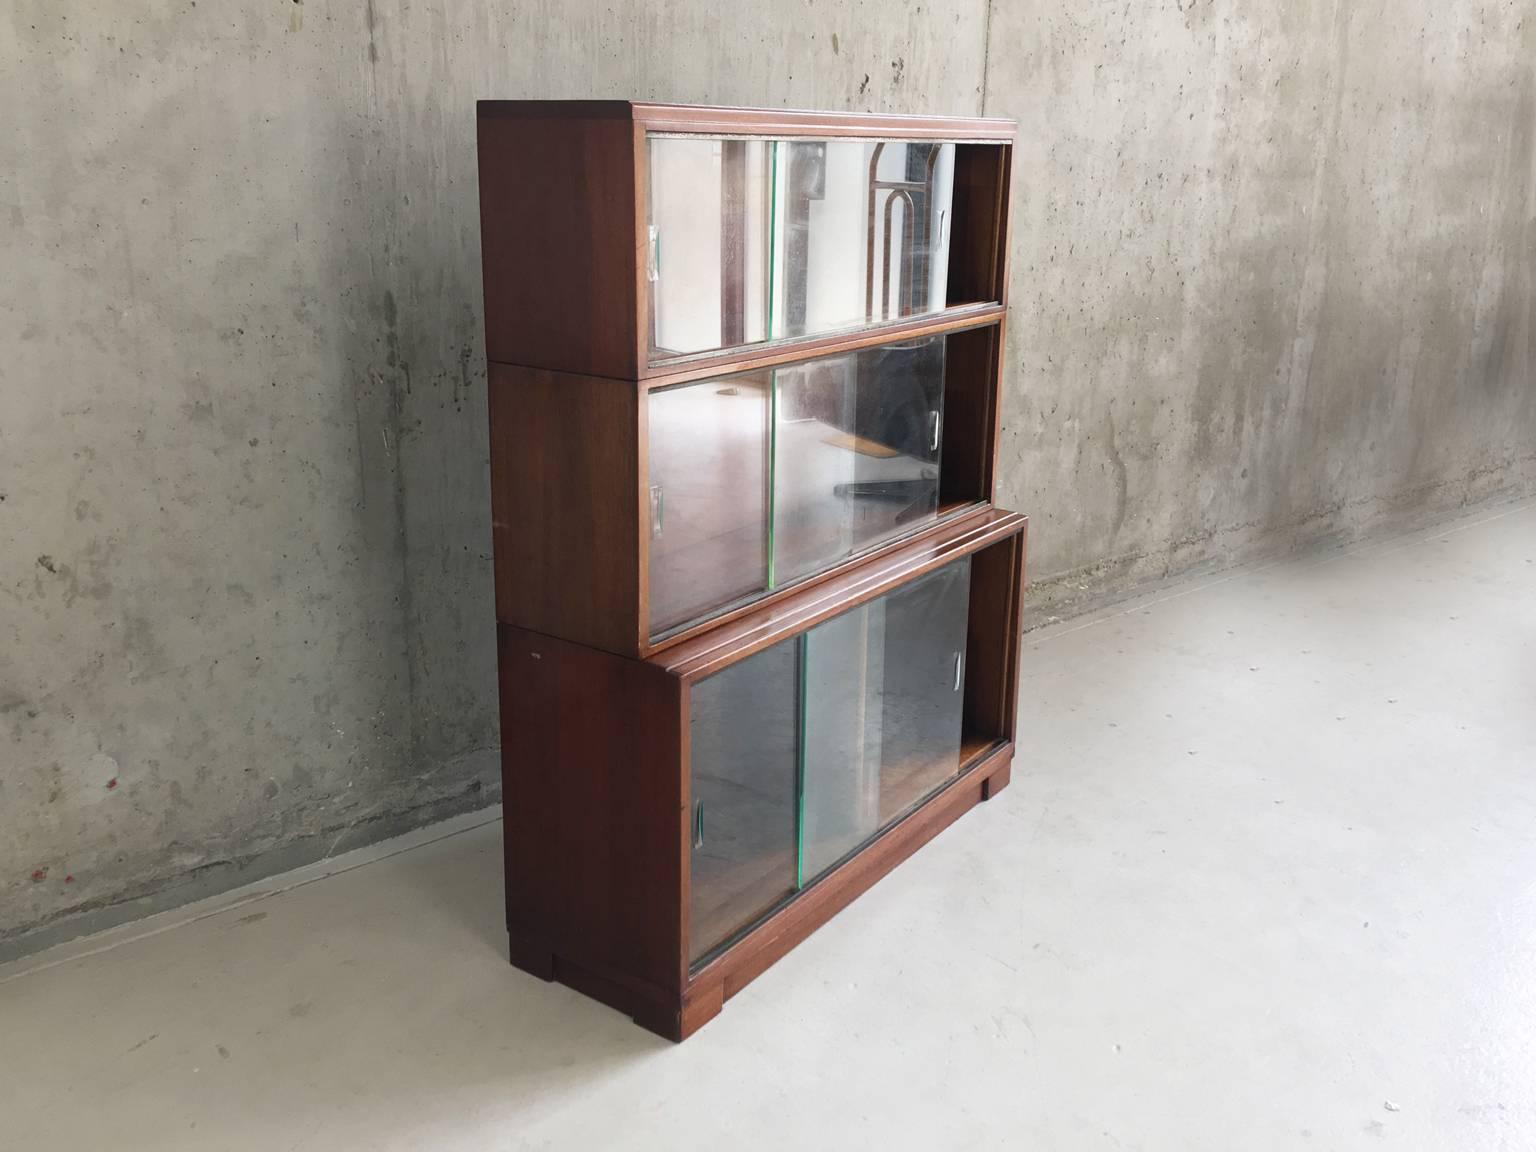 A stack of book case cabinets buy well-known English manufacturer Minty of Oxford. Solidly made with dark teak wood and glass sliding doors with recessed slots. There is some difference in shade on the inside where books over the years have blocked